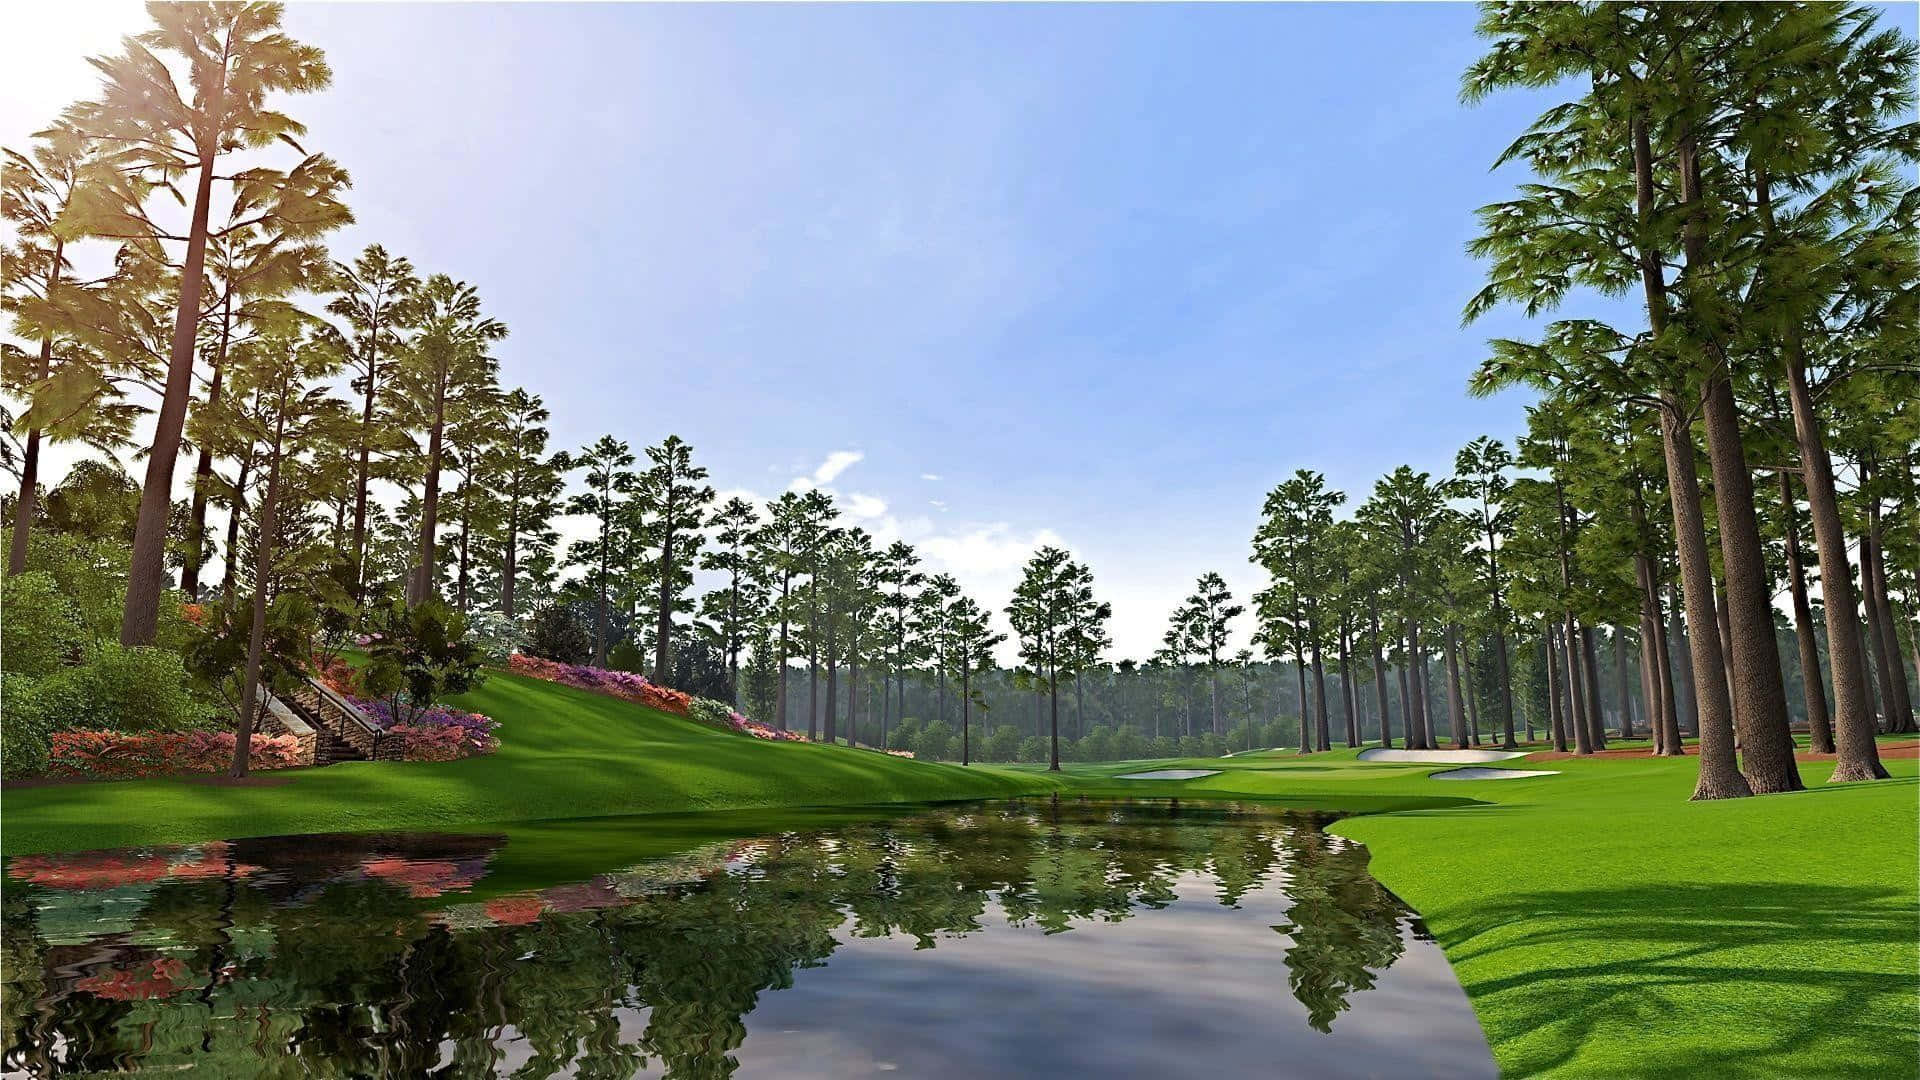 "Feel the rush of standing on the fairway at Augusta National golf course" Wallpaper